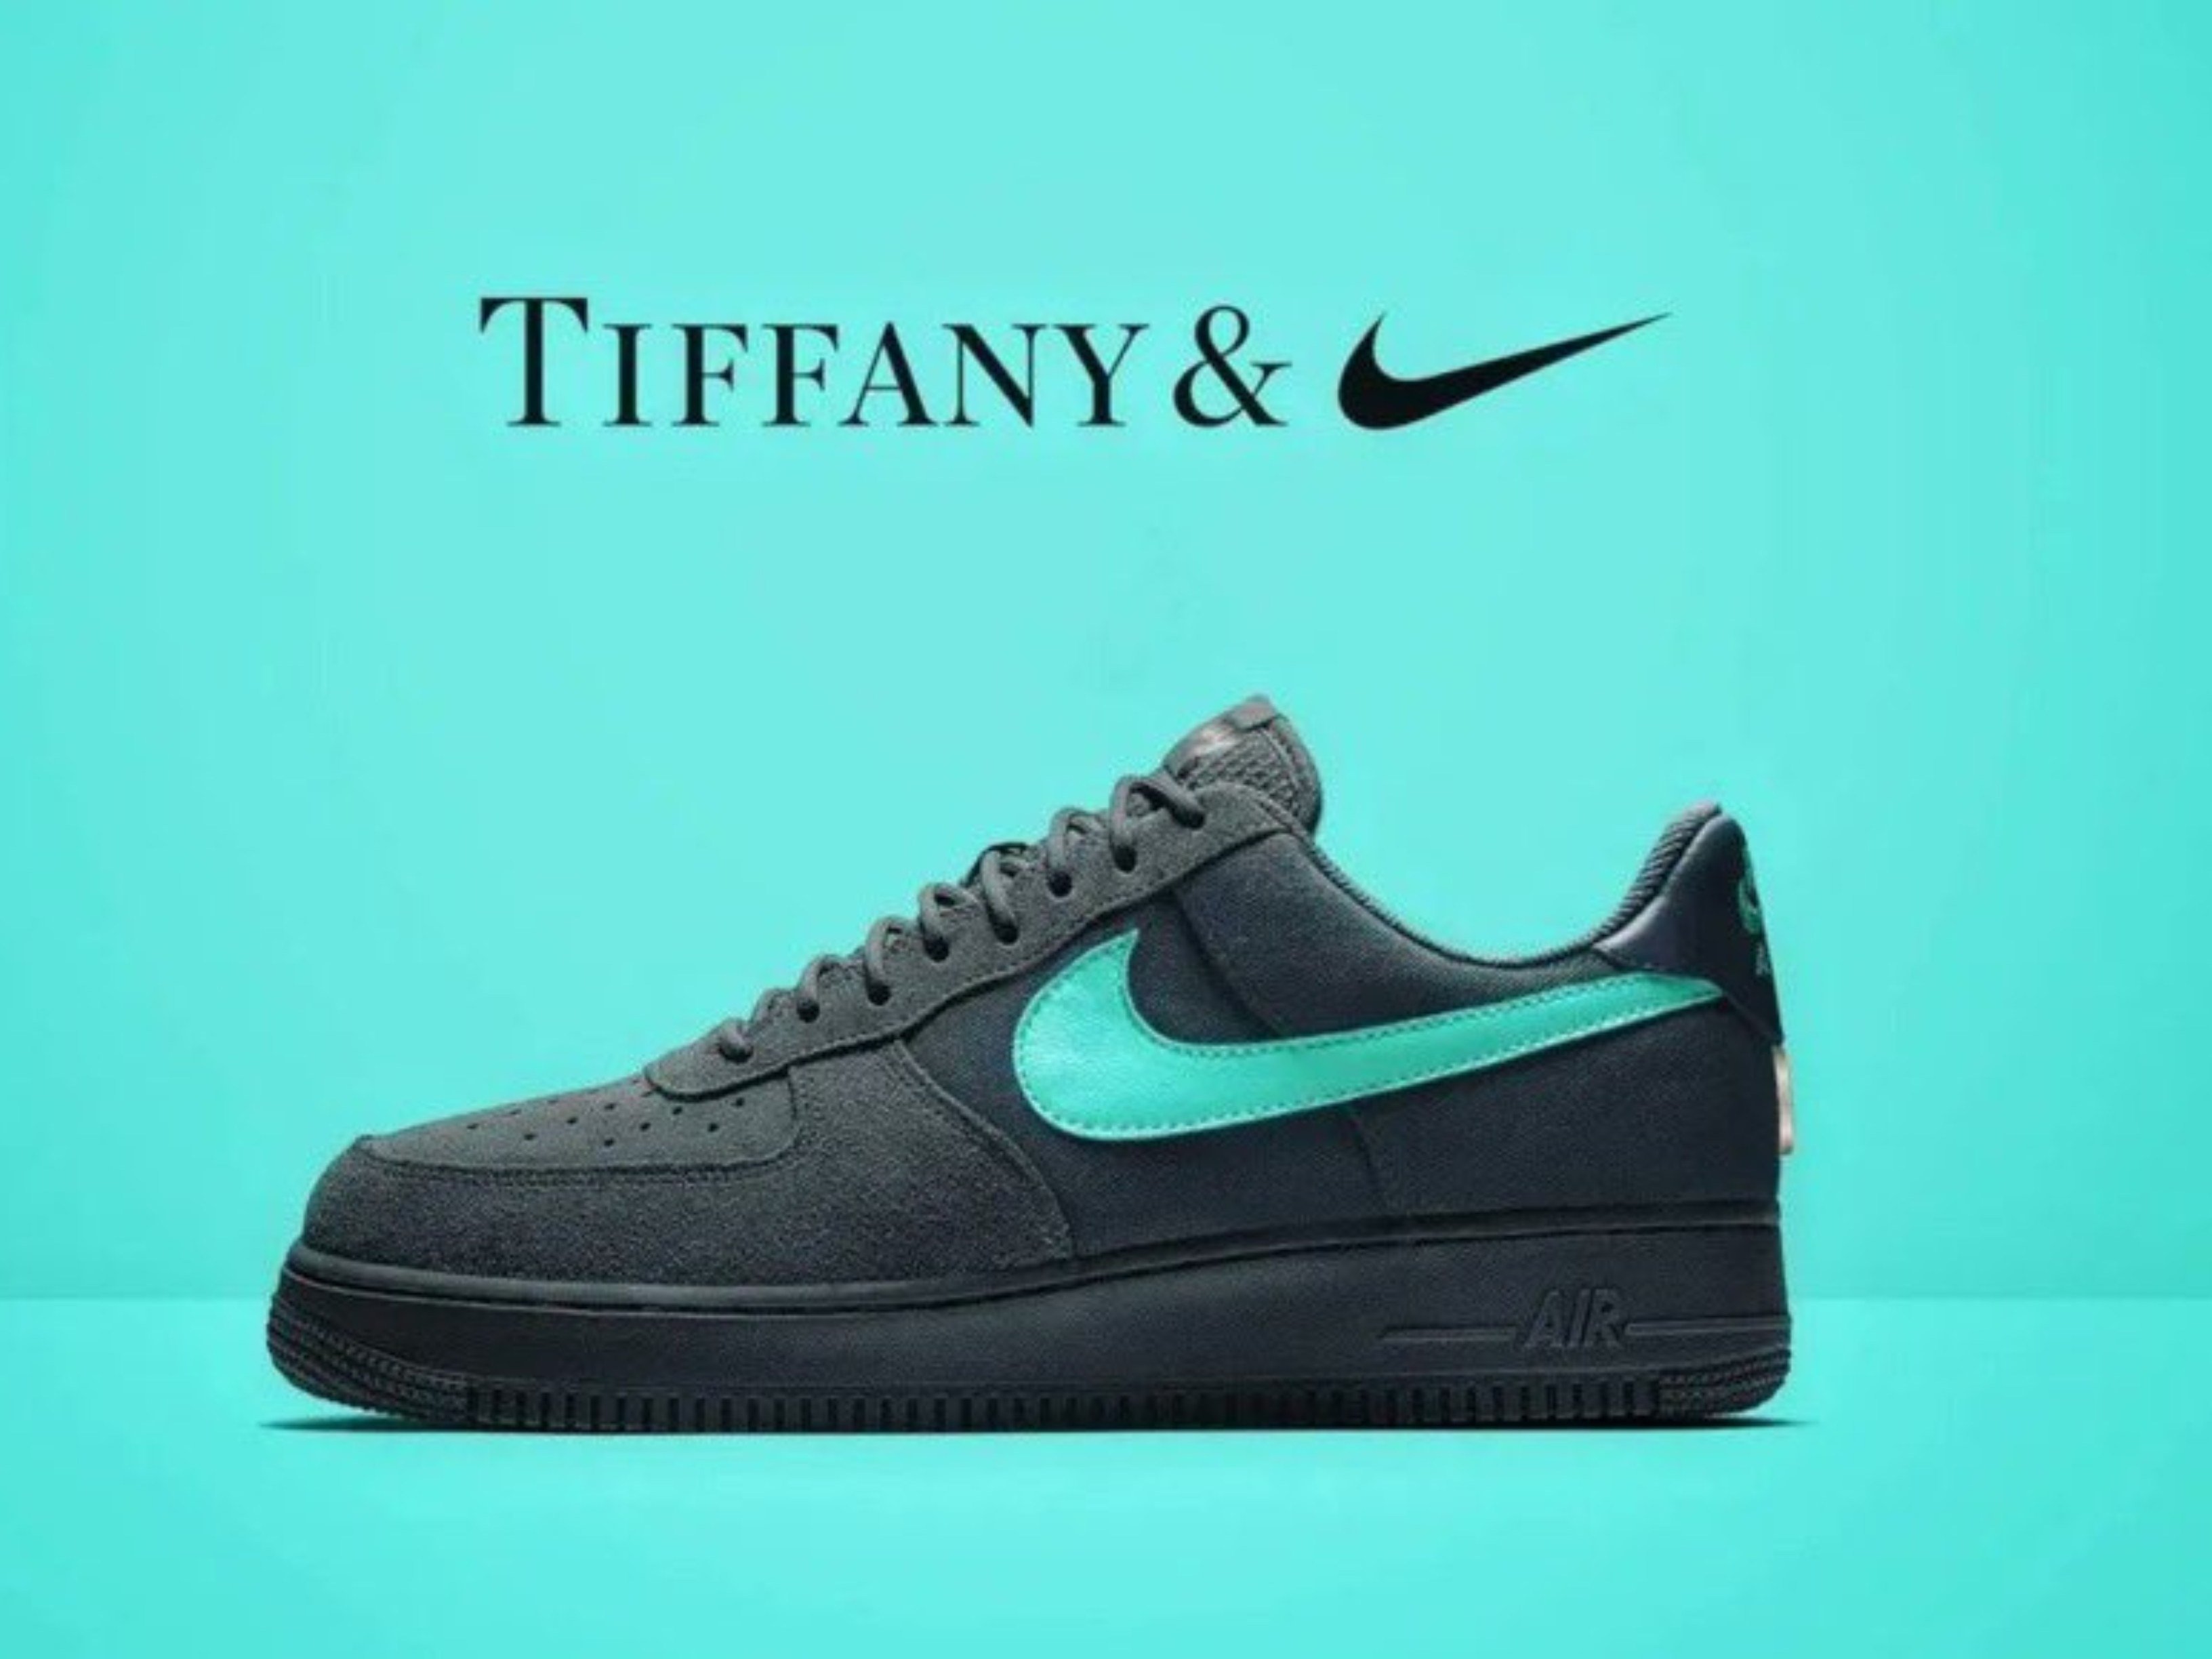 Memo floor remove Nike and Tiffany & Co. to launch US$400 sneakers: the Air Force 1 '1837'  limited-edition shoe collaboration comes after the LVMH brand worked with  Beyoncé and Jay-Z – but some are calling